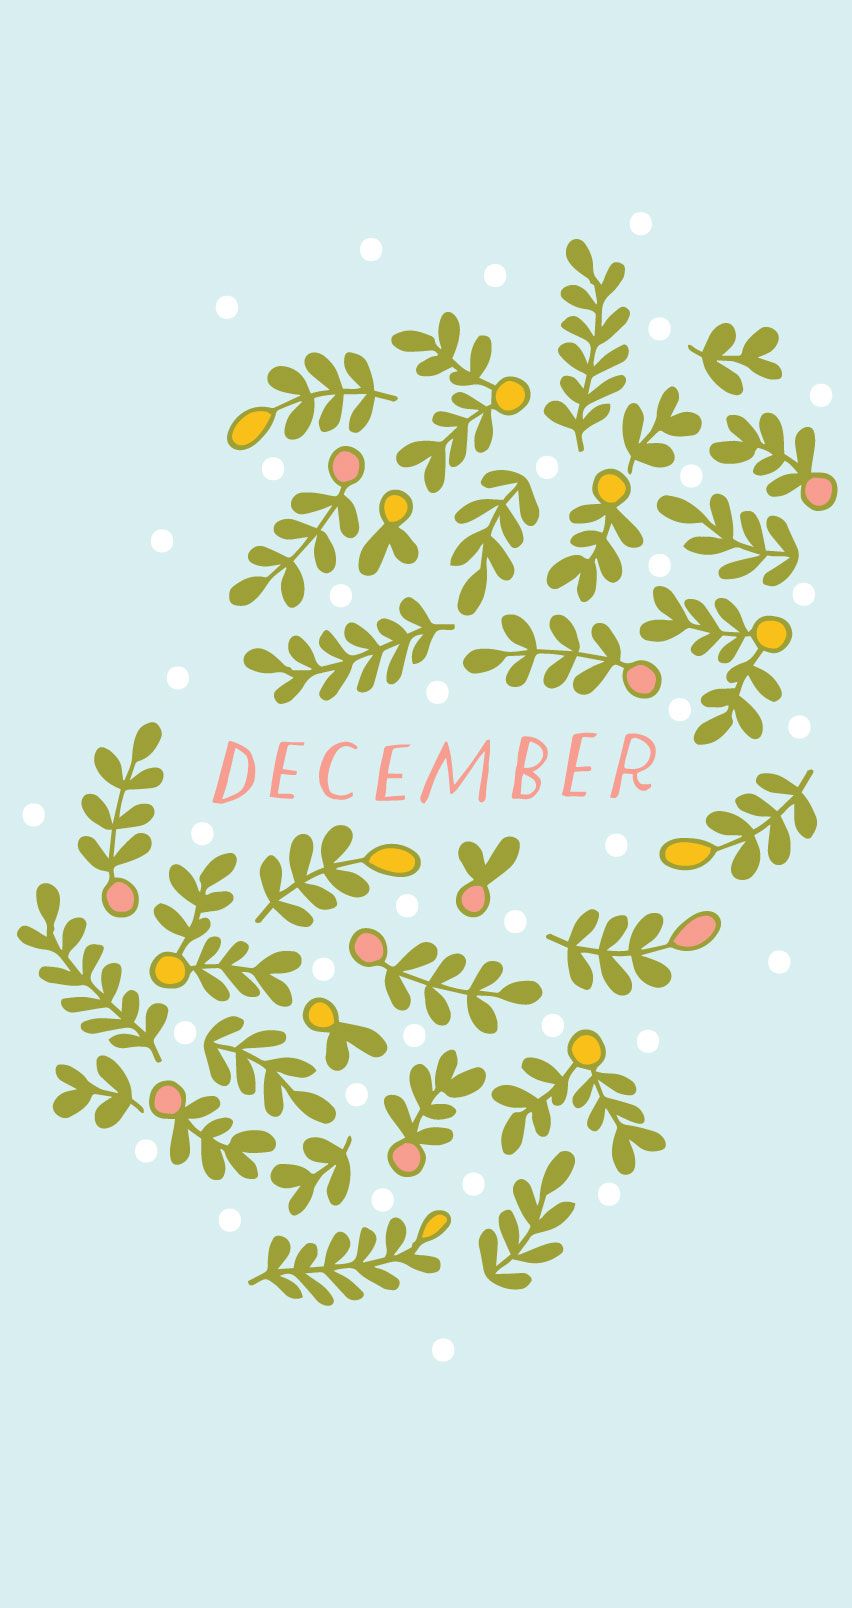 December wallpaper with greenery and snowflakes on a blue background - December